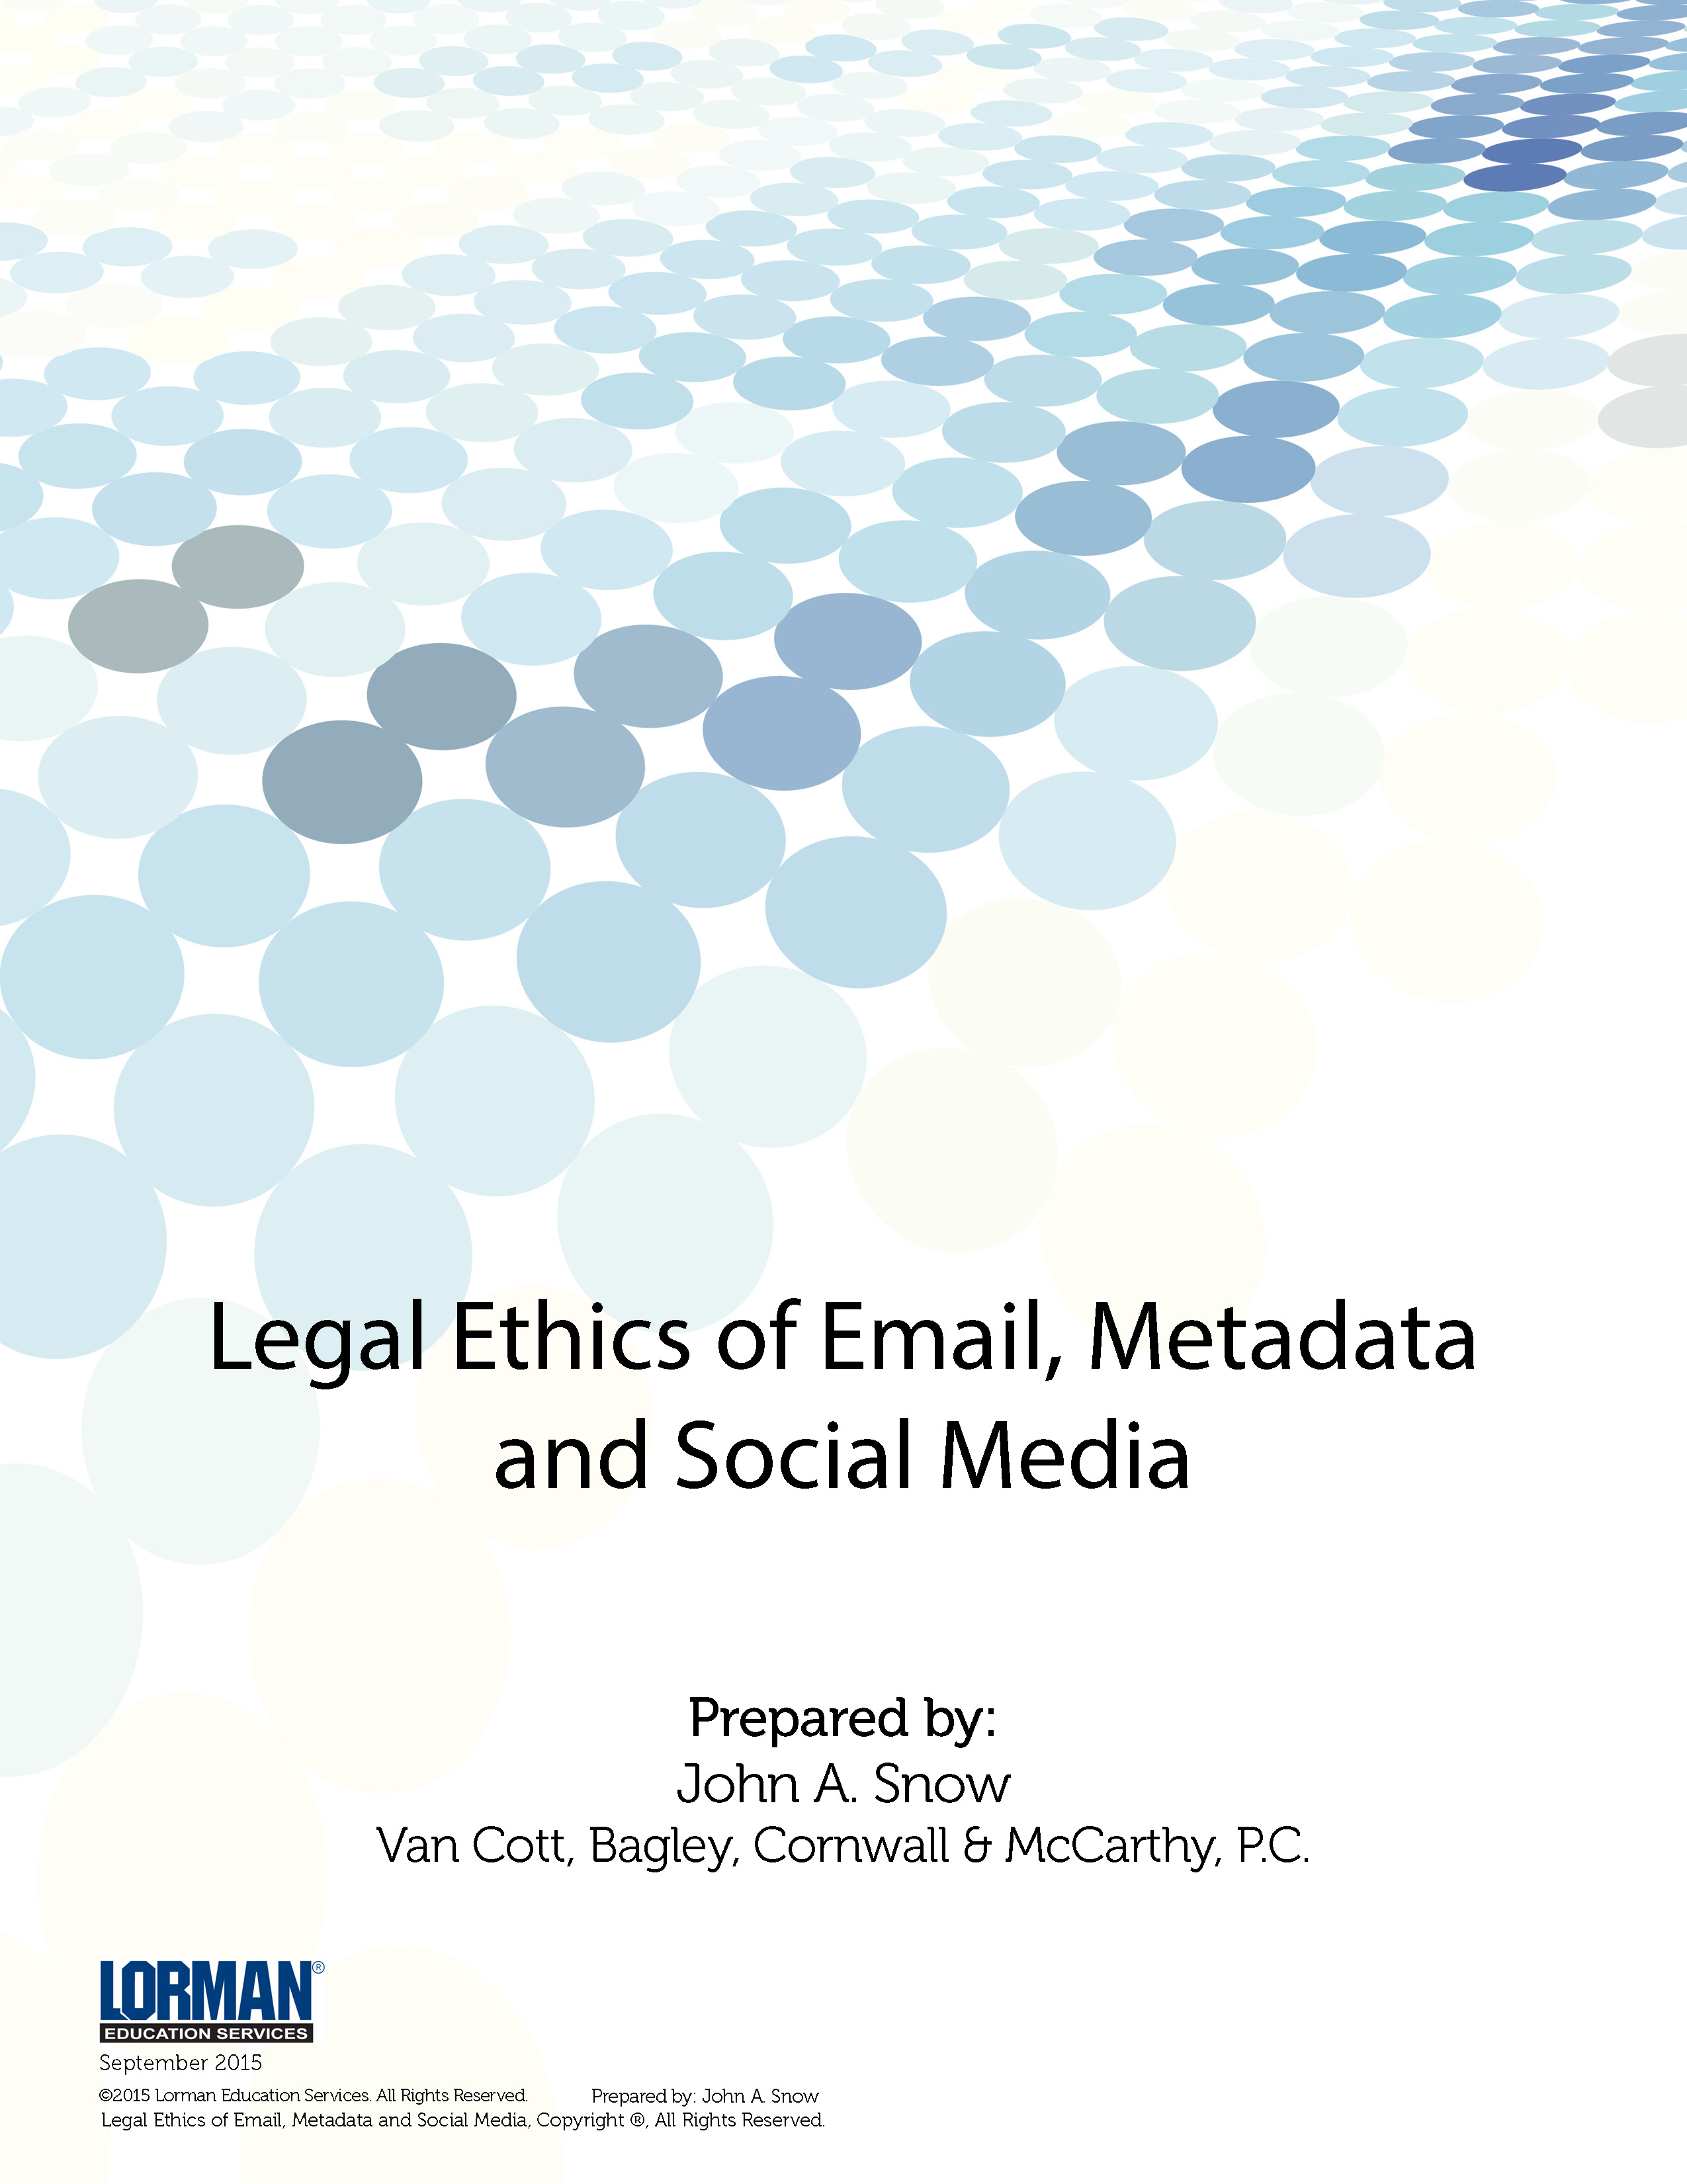 Legal Ethics of Email, Metadata and Social Media